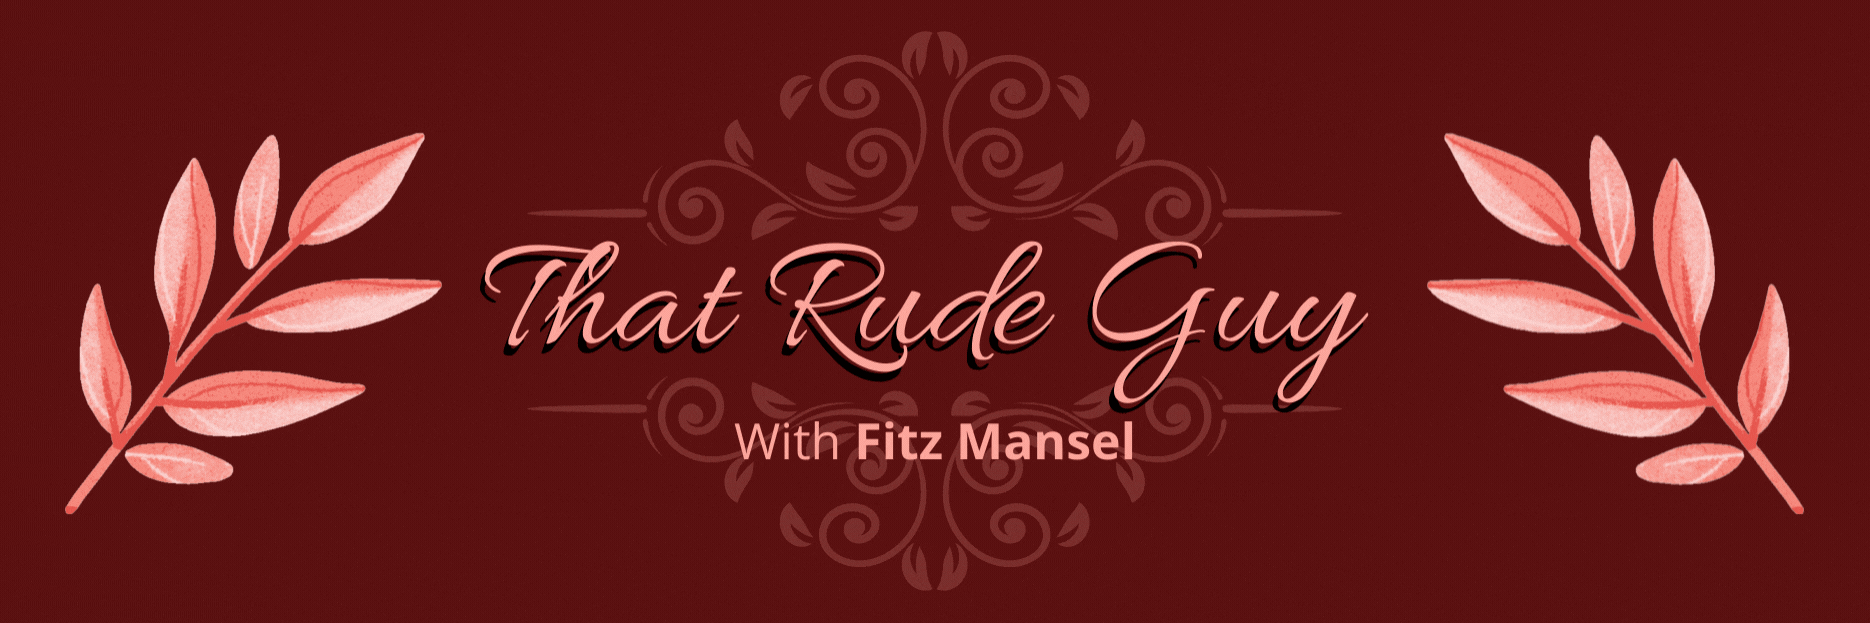 That Rude Guy: Fairytale Gone Bad